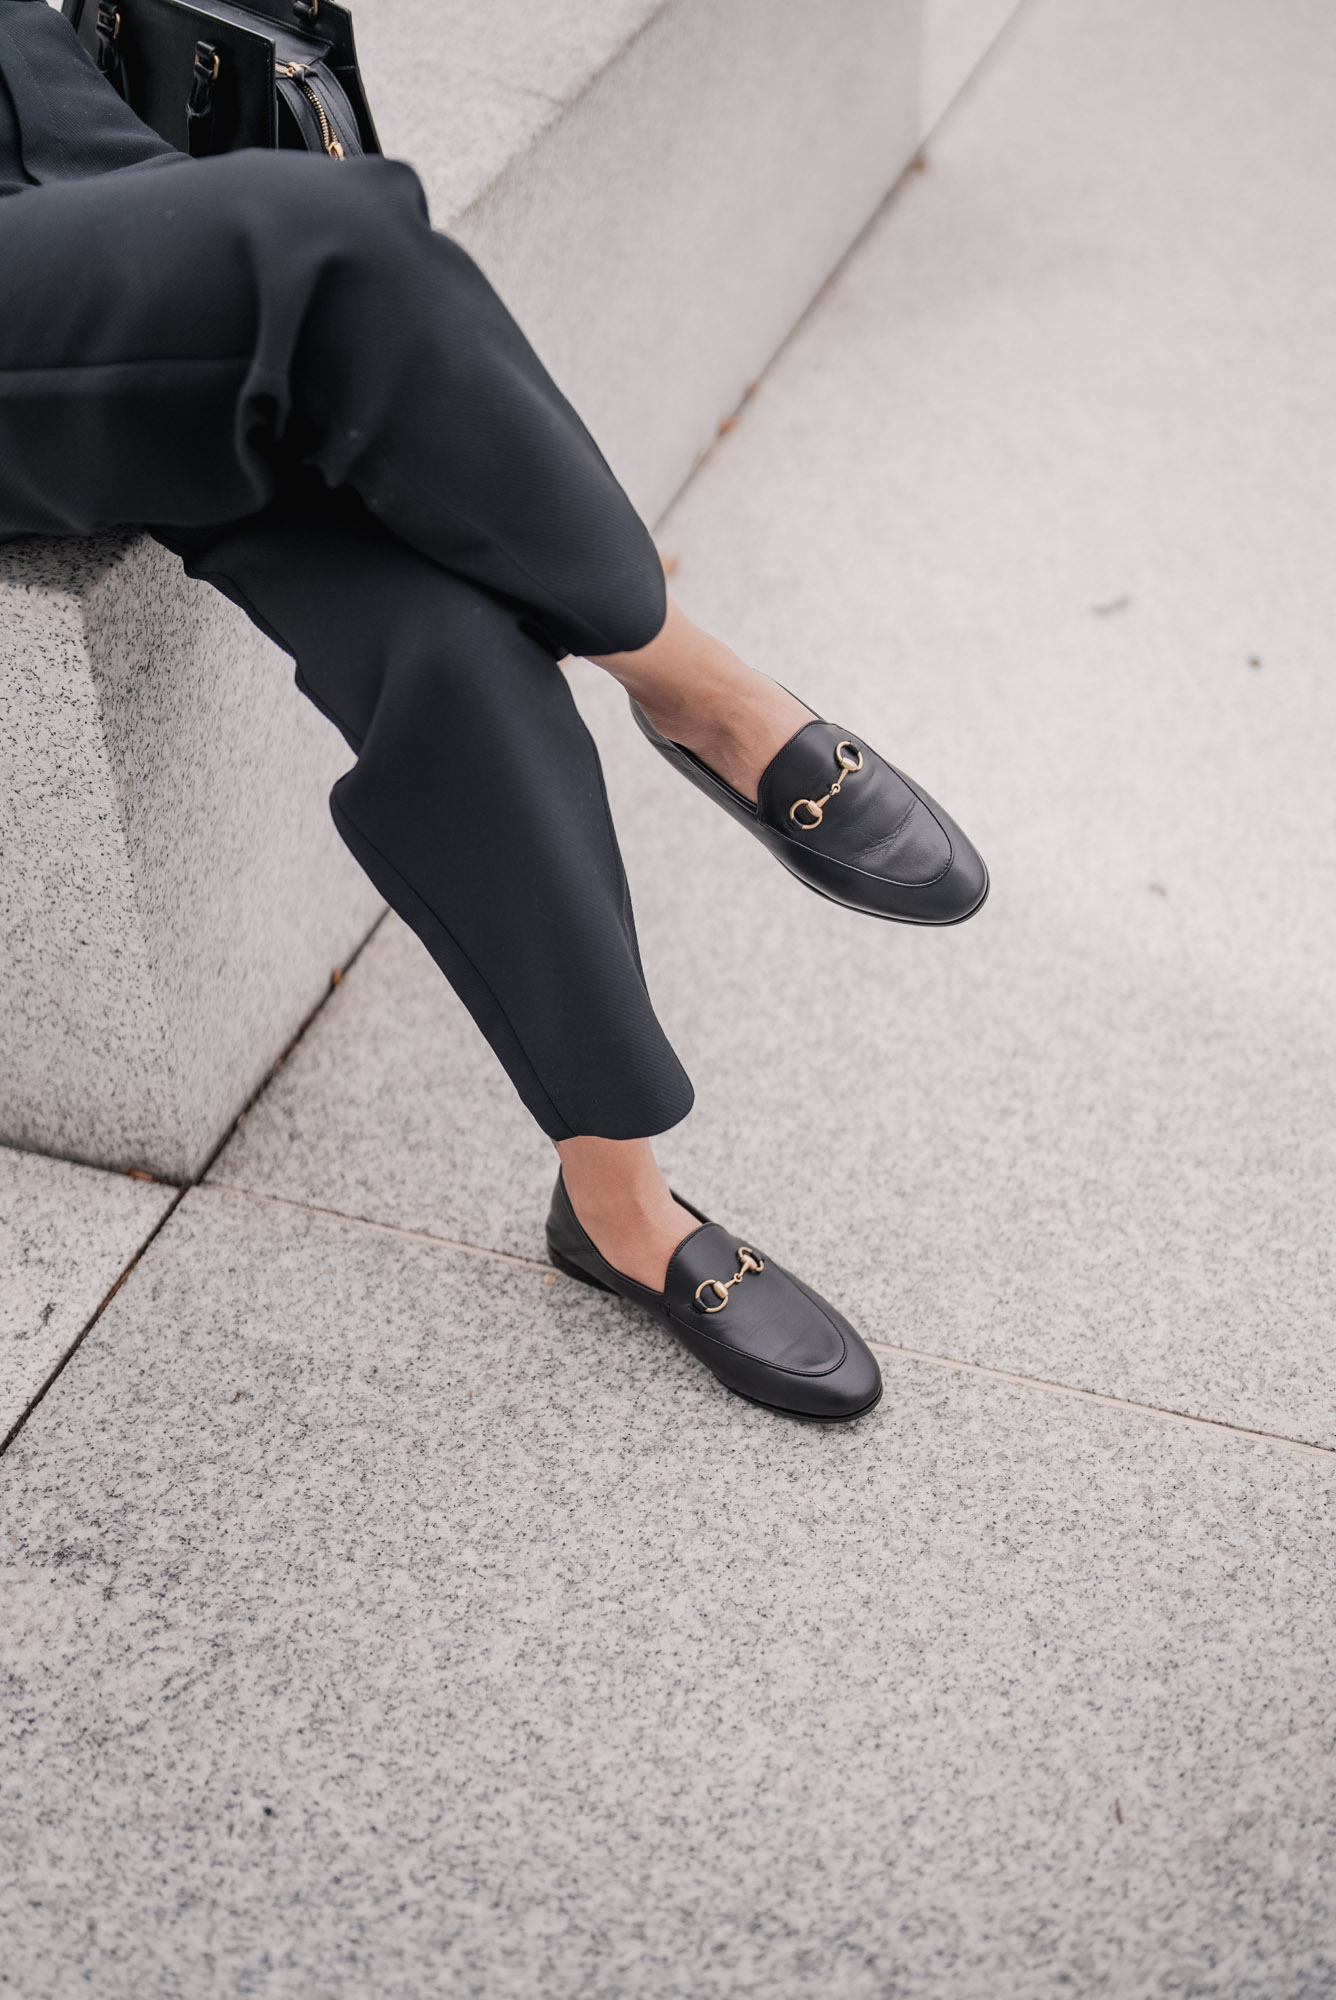 Gucci Brixton Loafers Review – Worth It?